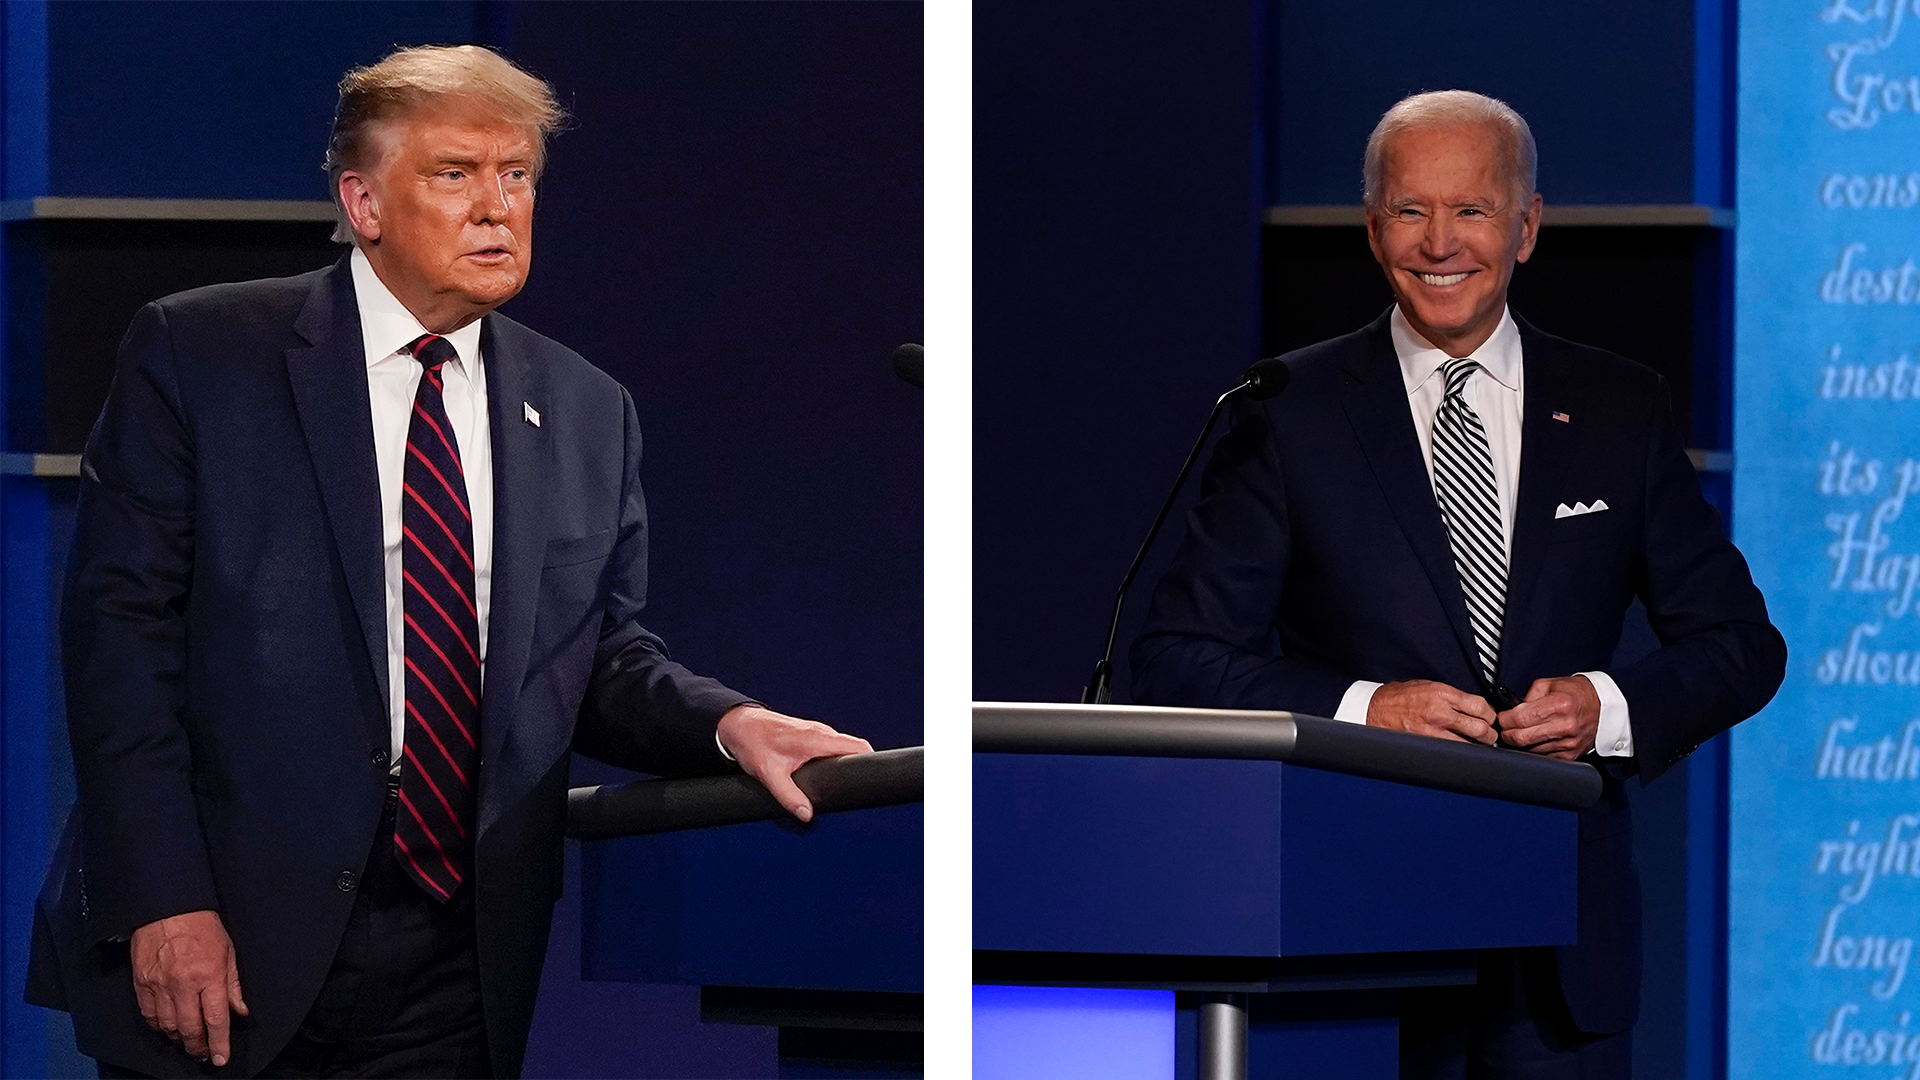 Biden leads Trump by 9 points in Michigan: News/WDIV-TV poll